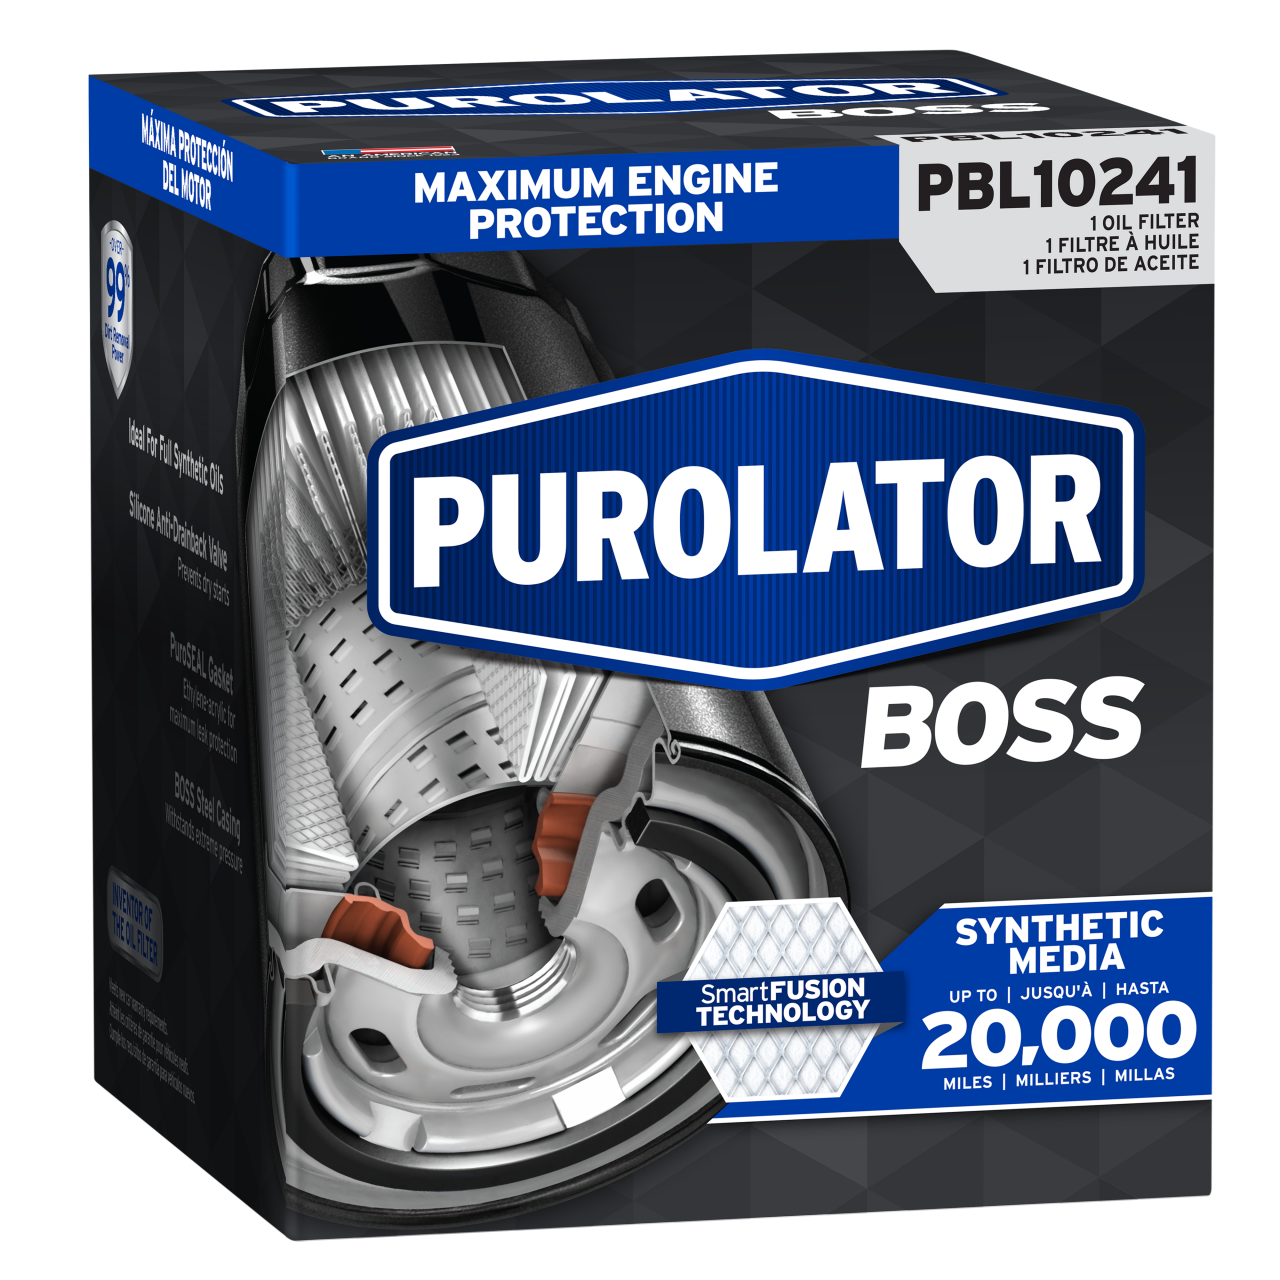 For maximum engine protection and performance, go with PurolatorBOSS® Maximum Engine Protection Oil Filters.